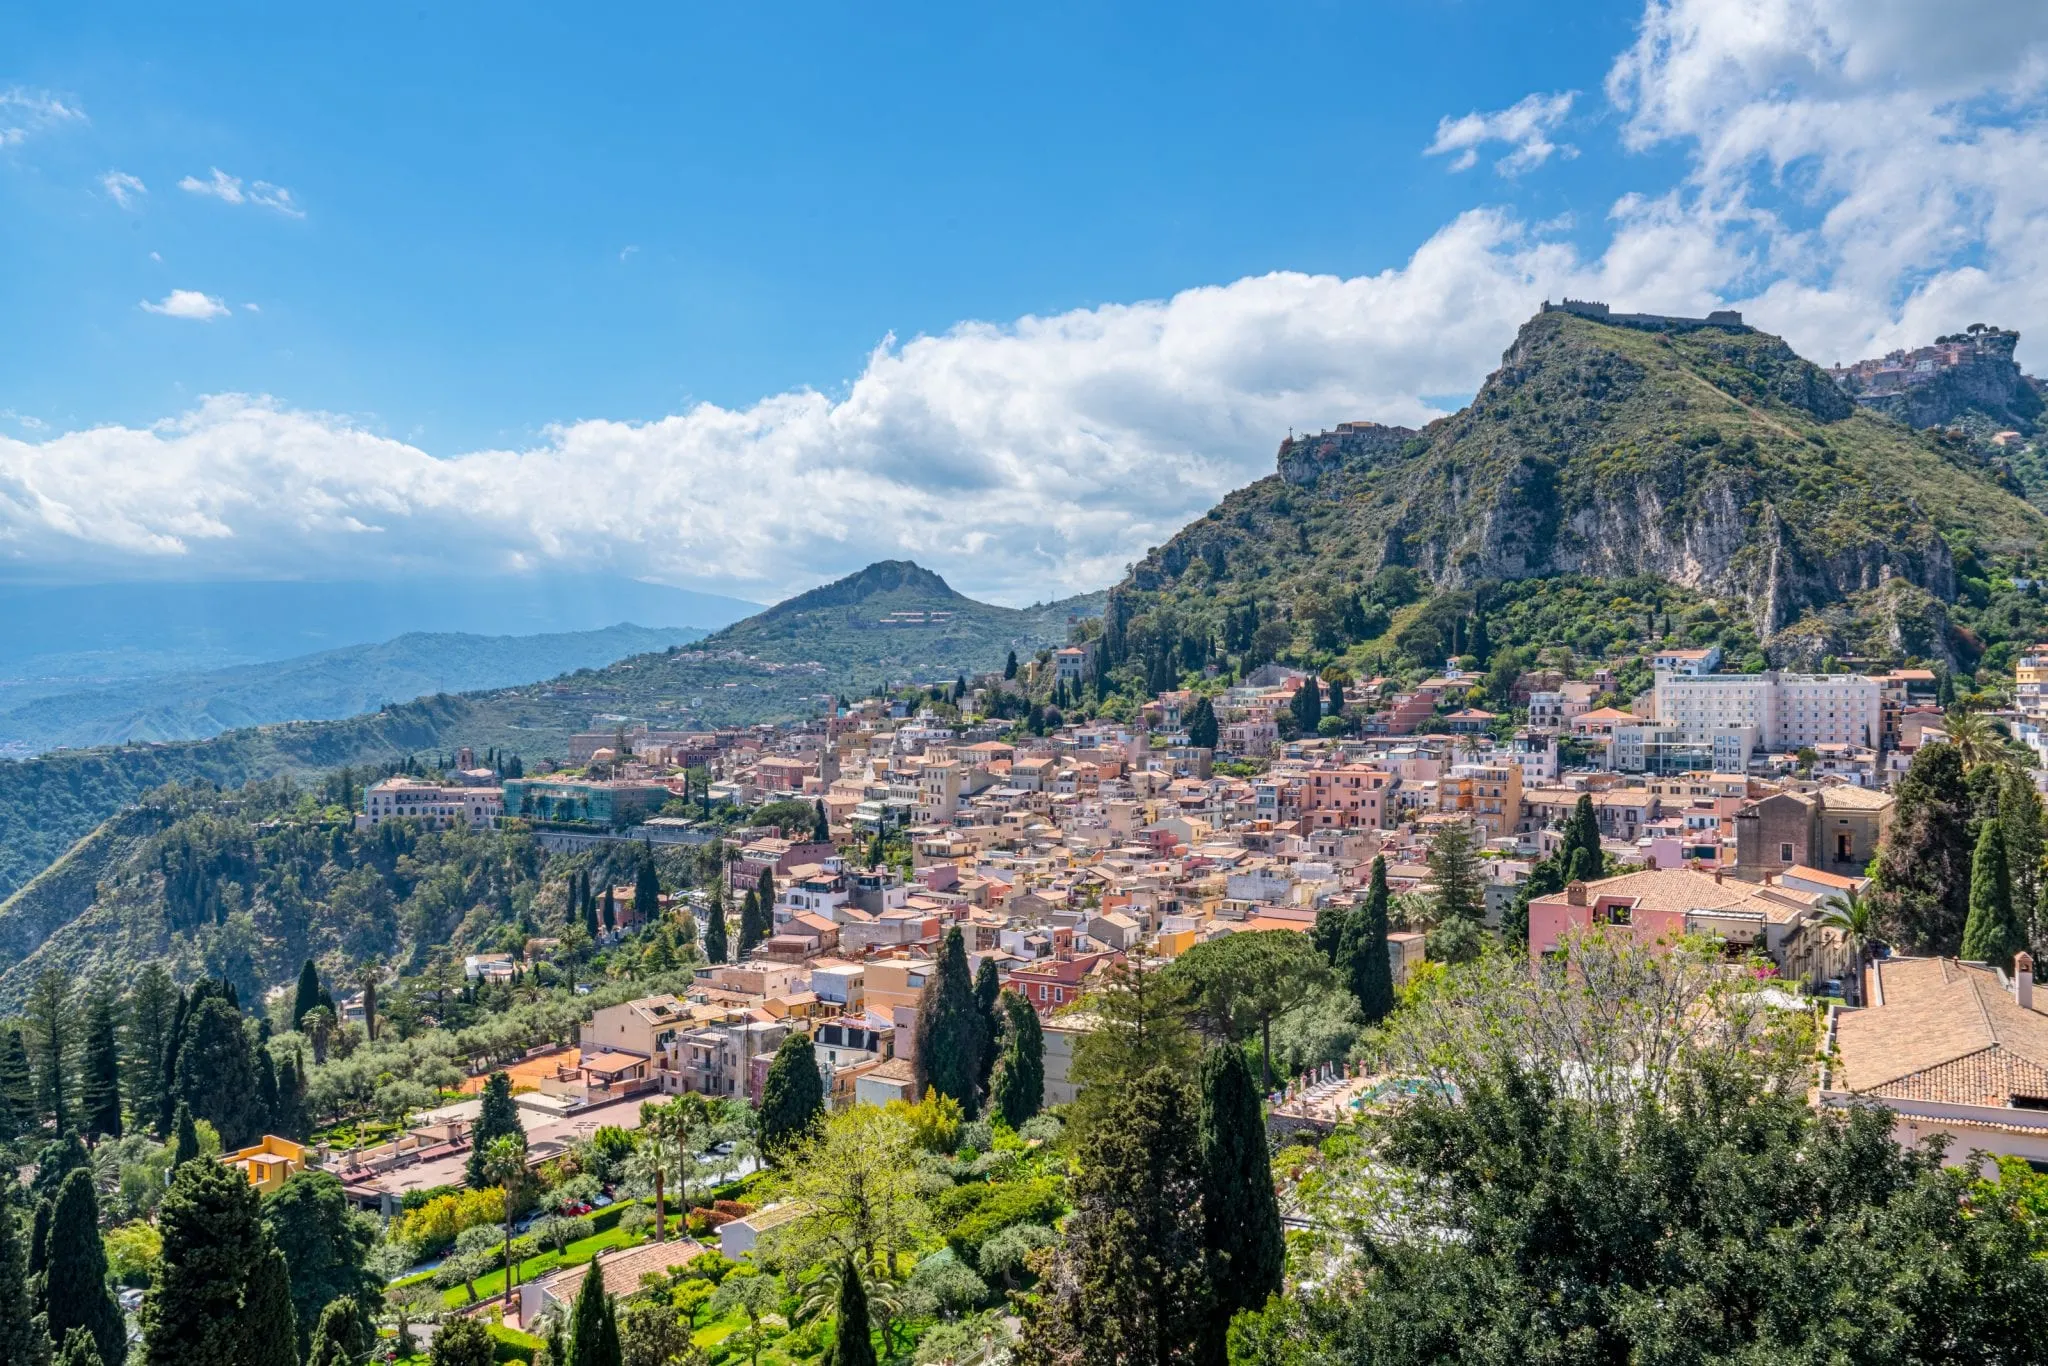 11 Best Things to Do in Taormina, Sicily - Our Escape Clause